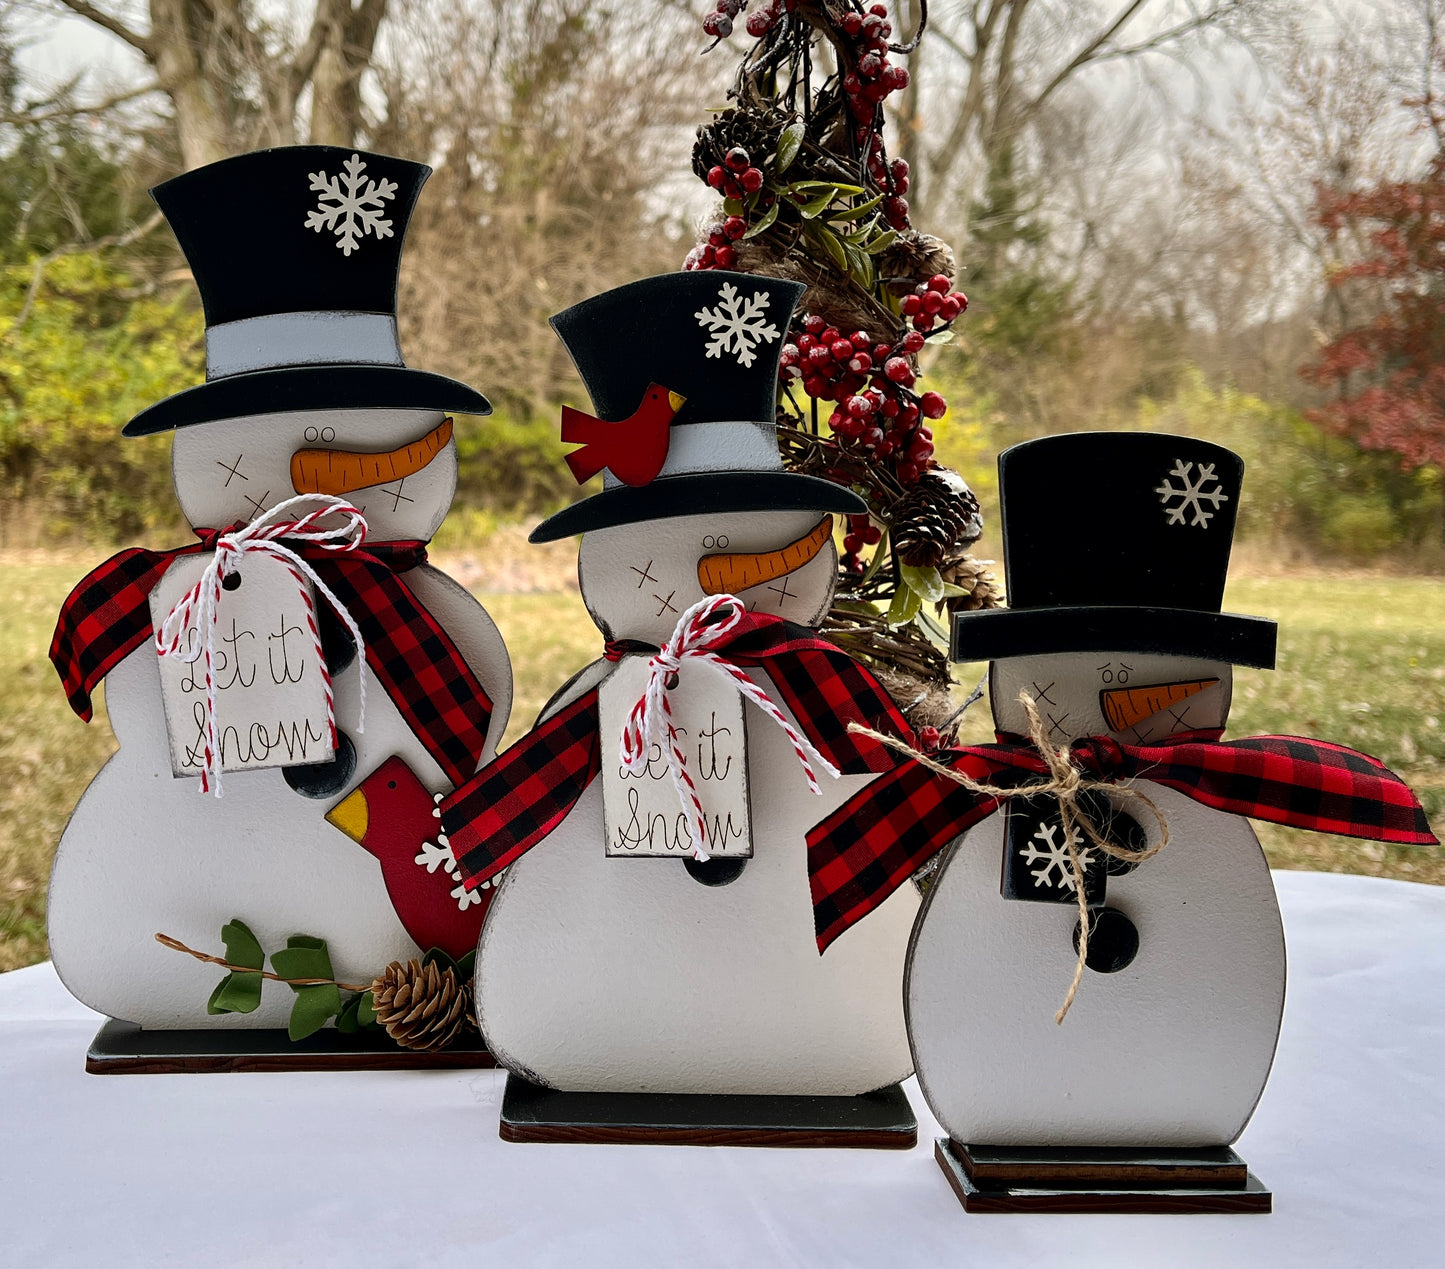 Snowman Large 10.5" WITH Greenery